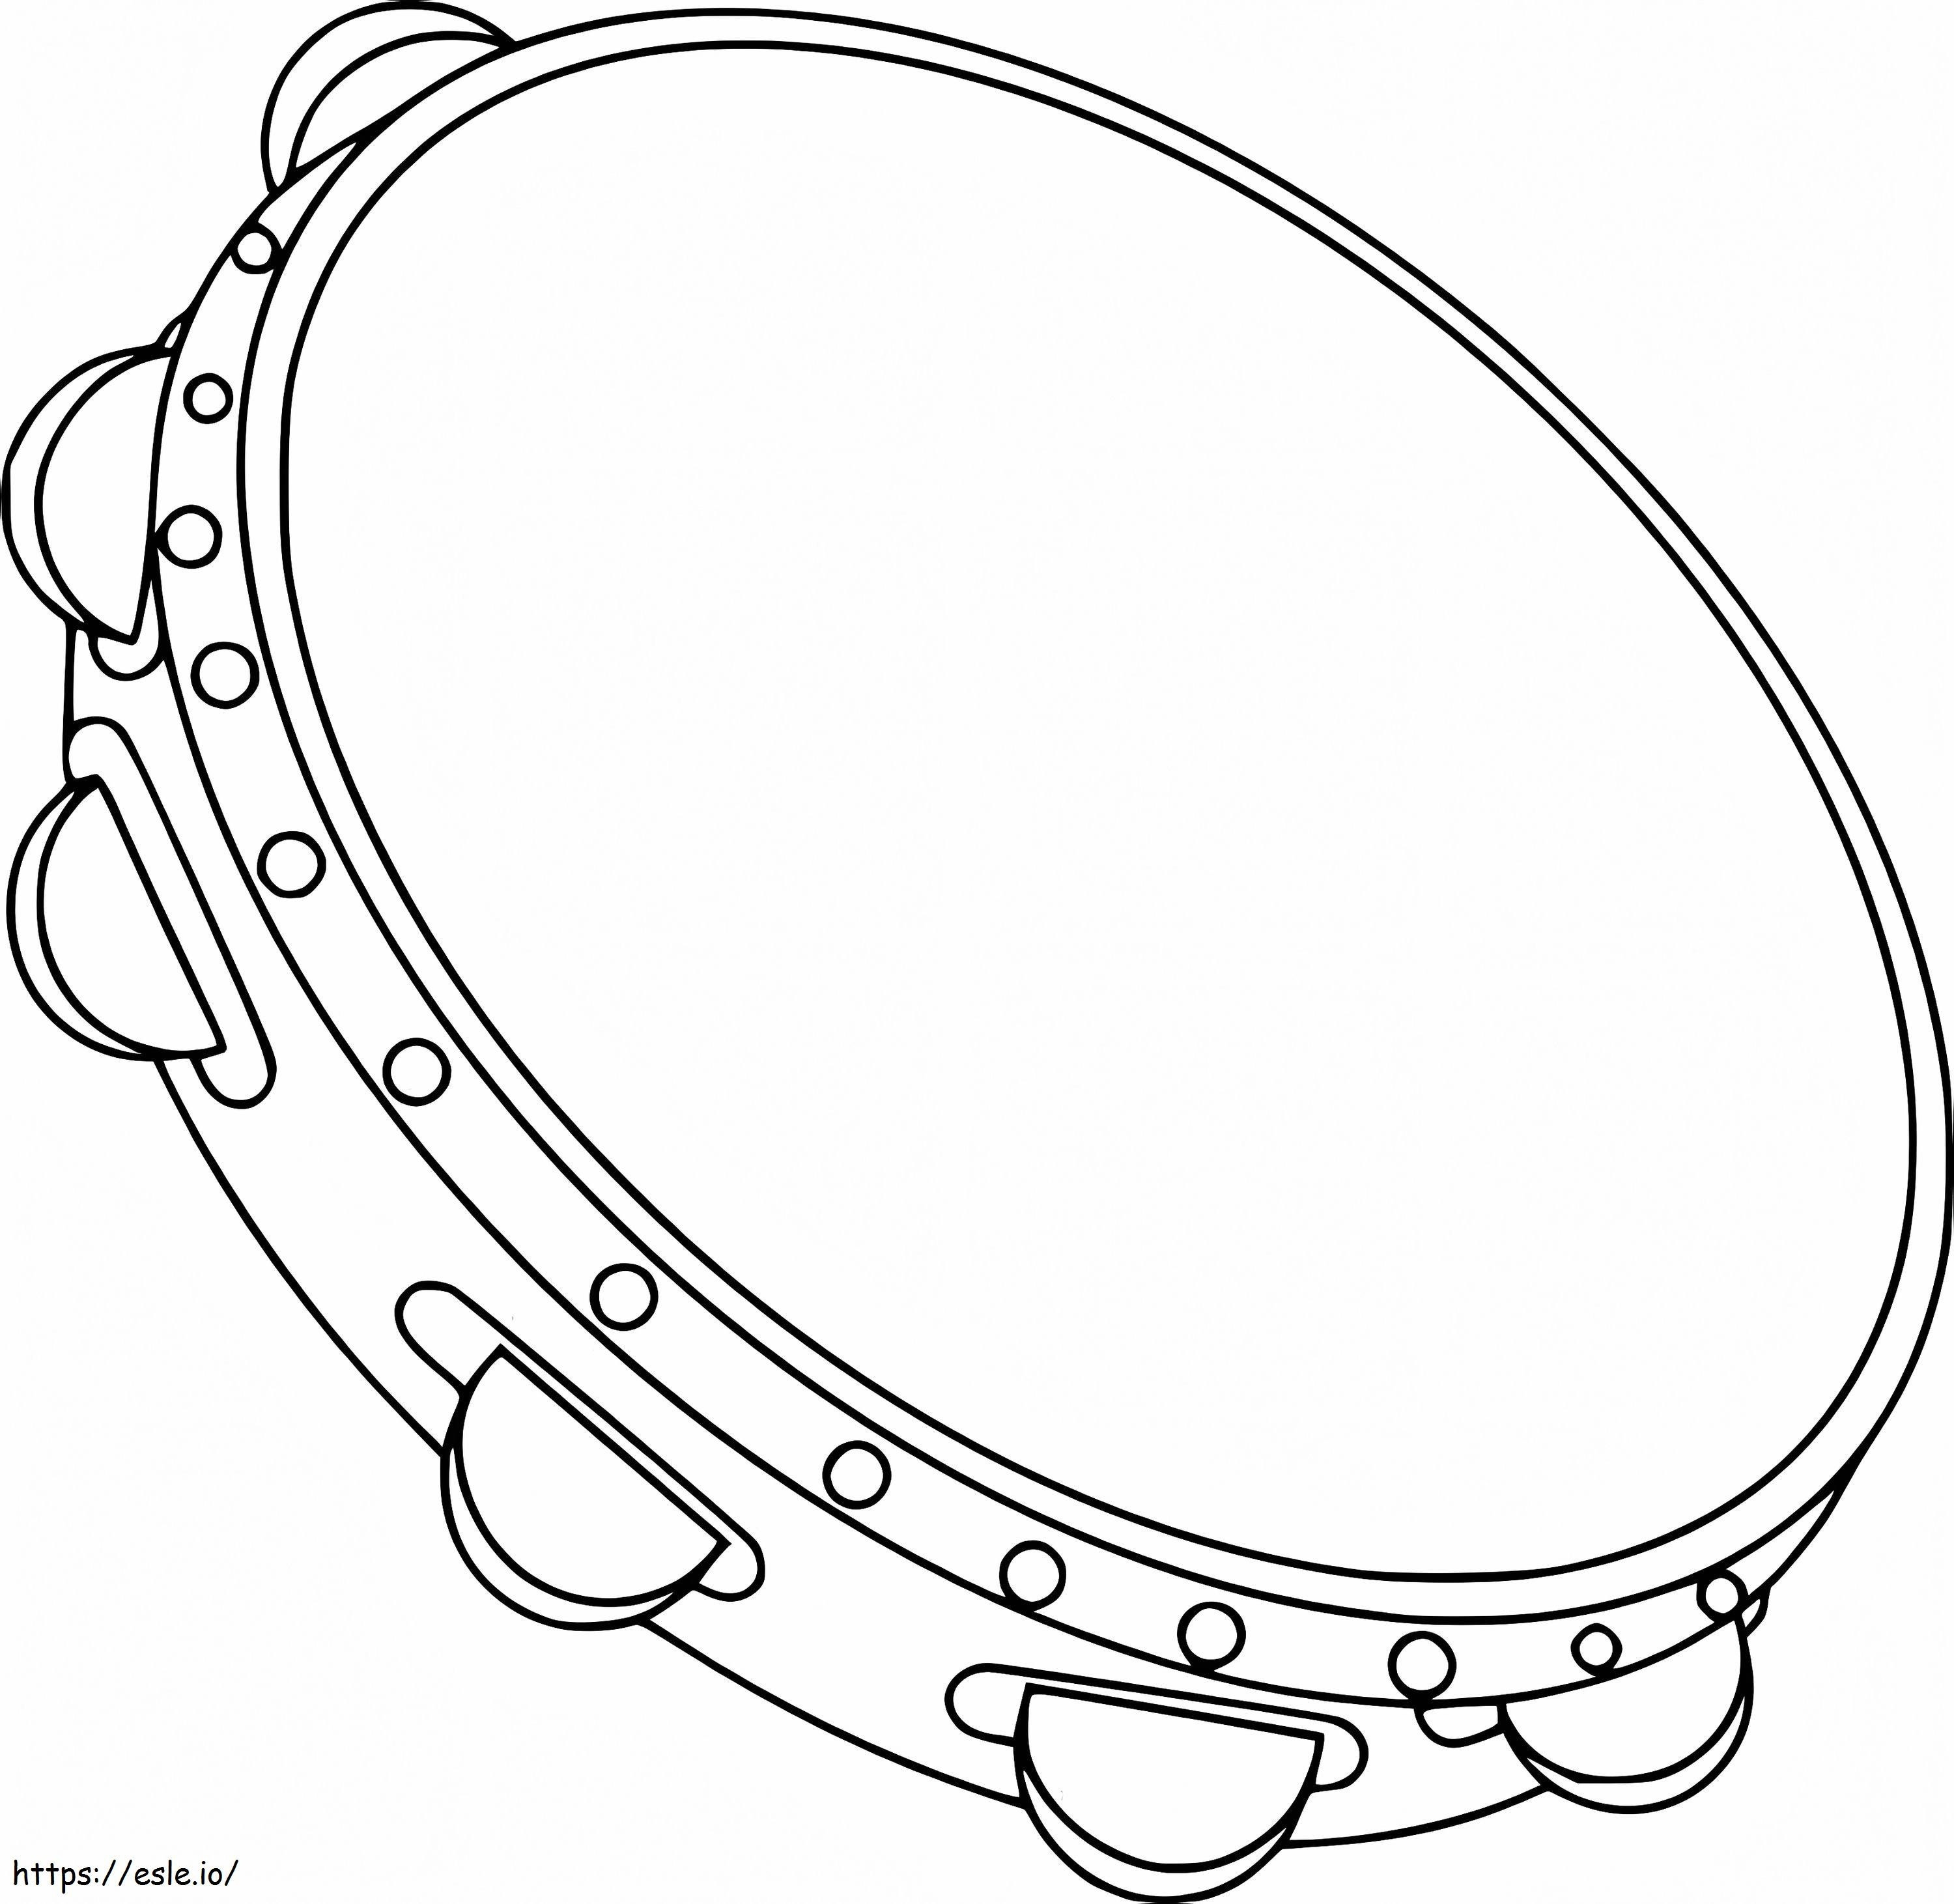 Normal Tambourine coloring page